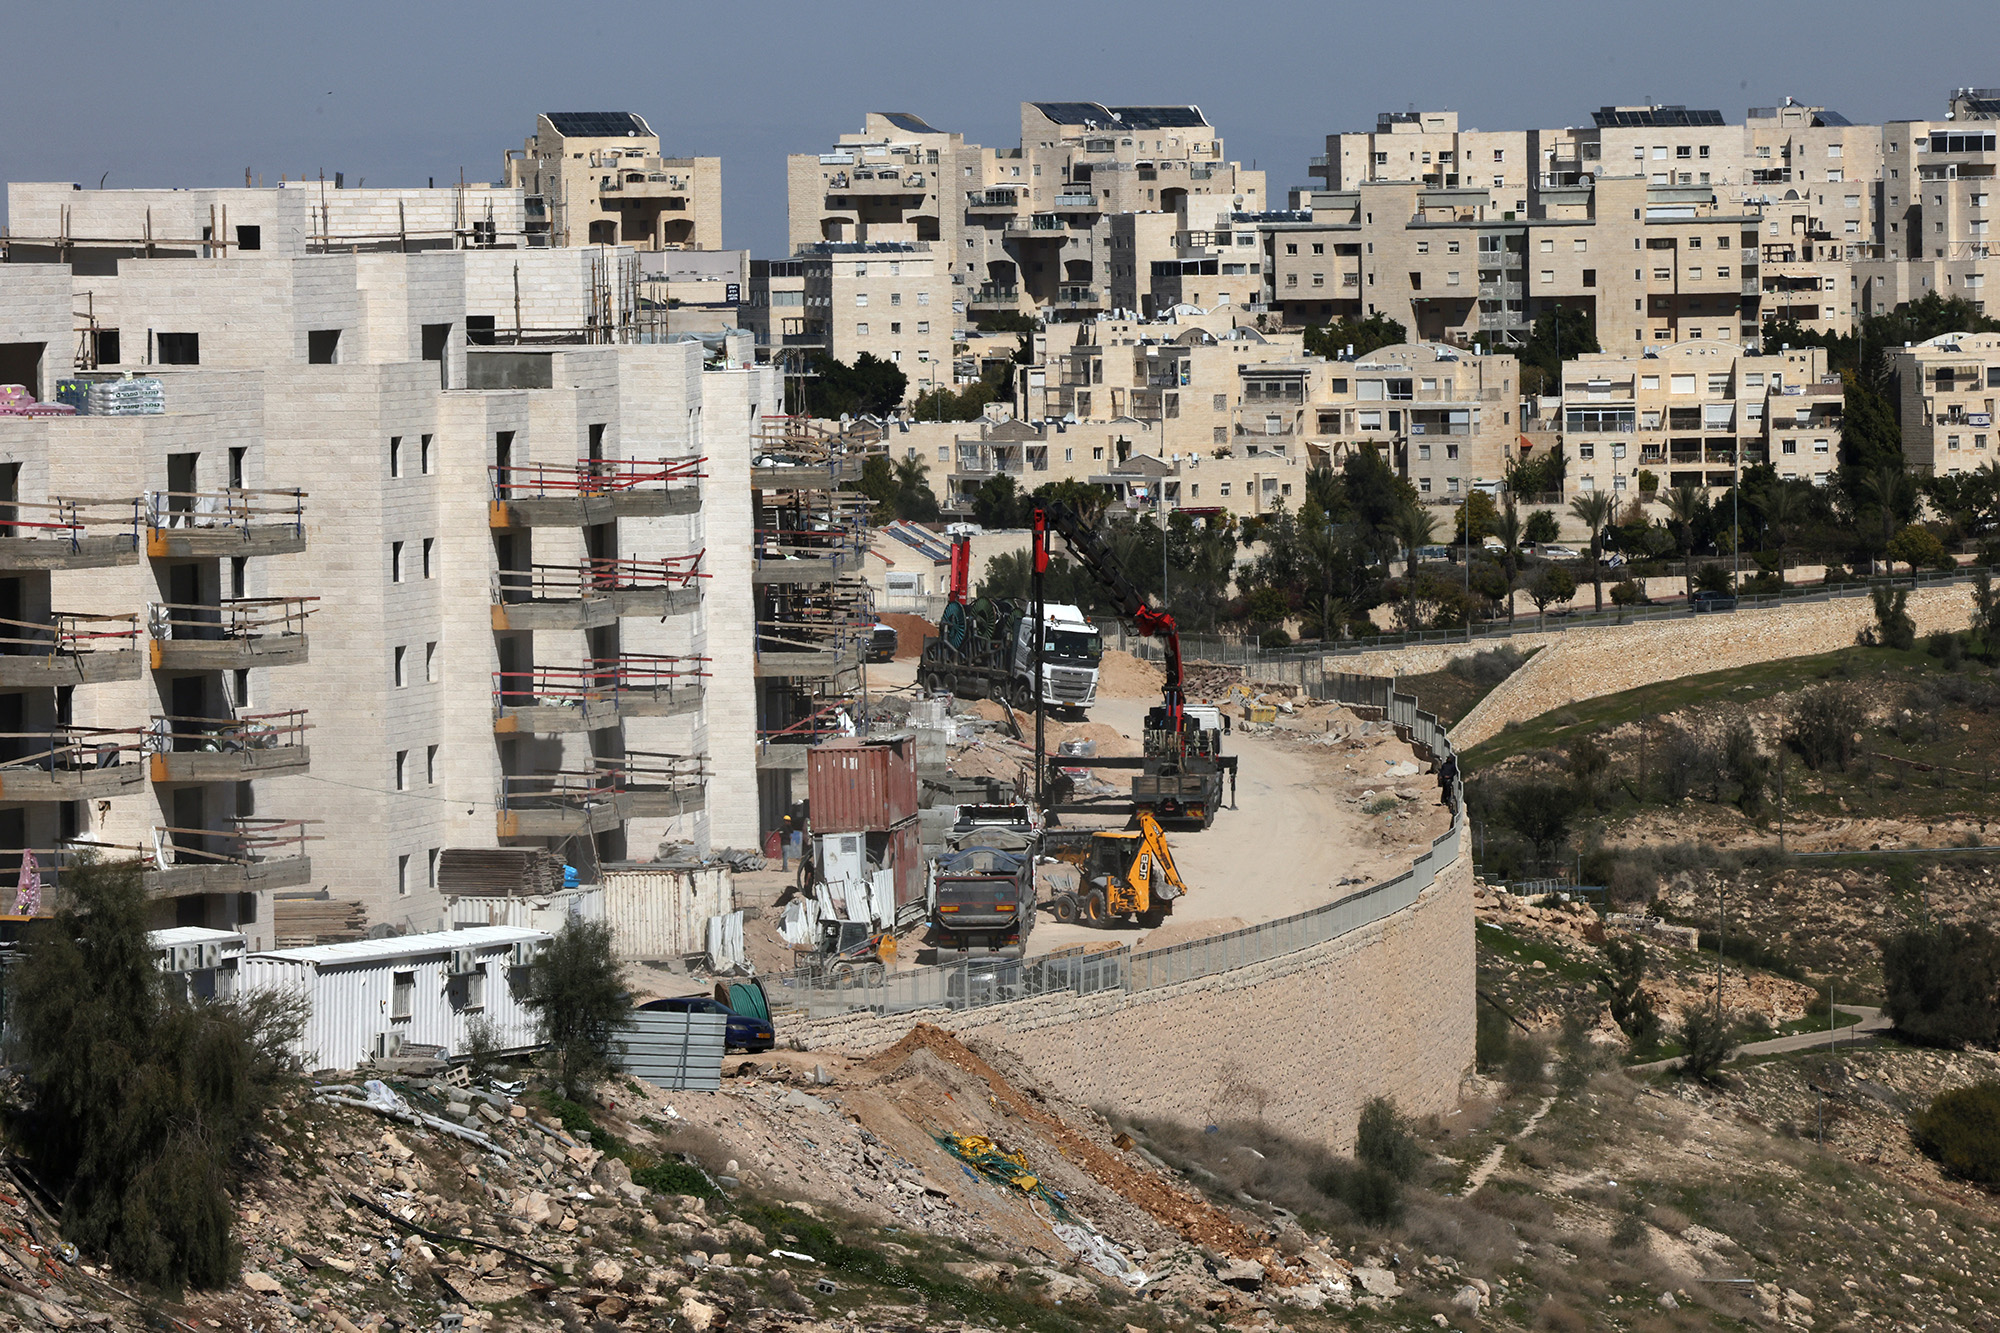 Laborers work at a construction site in the Israeli settlement of Maale Adumim, in the occupied West Bank, on February 29.